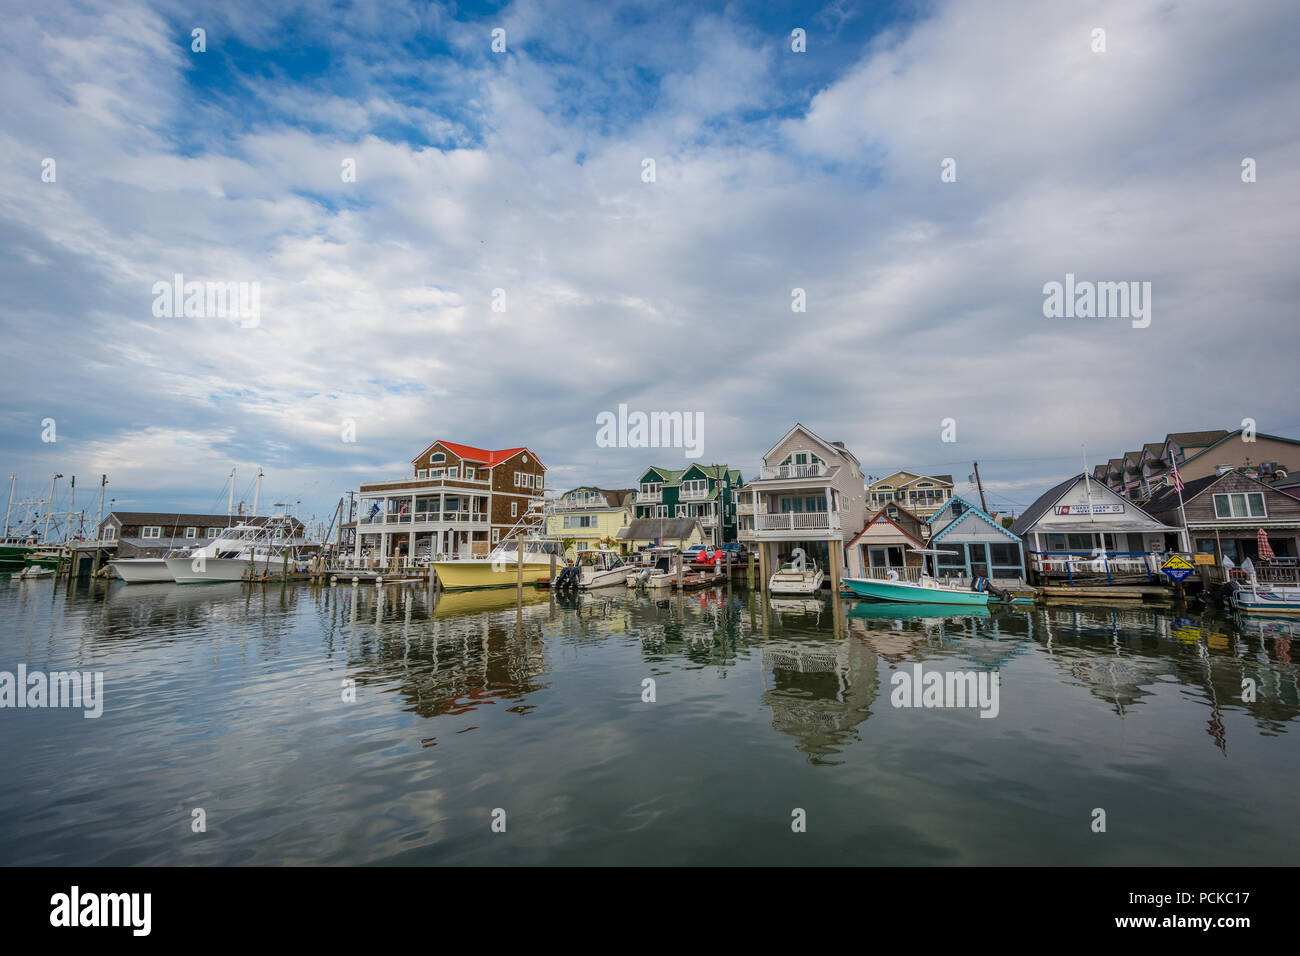 Cape May Hafen, in Cape May, New Jersey. Stockfoto